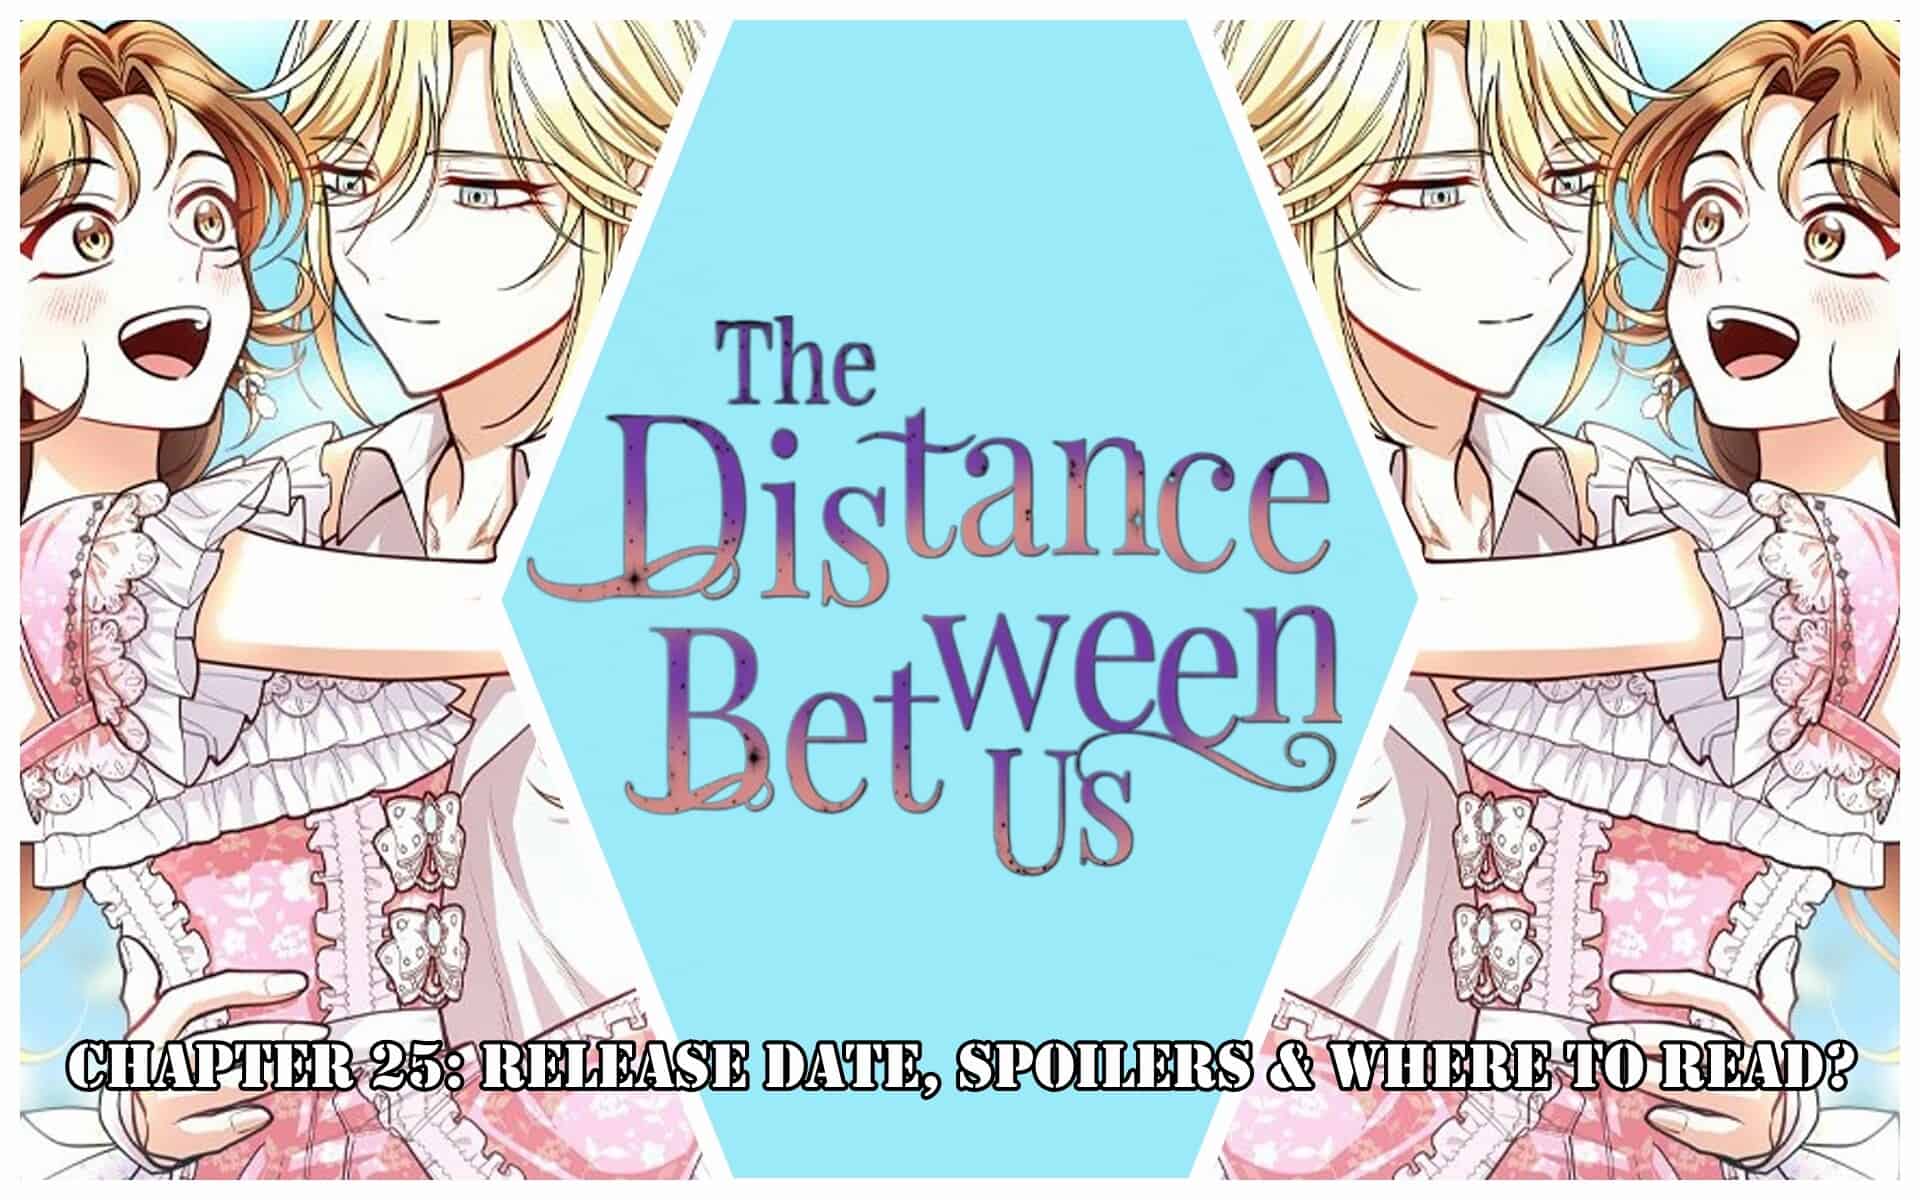 The Gap Between You And Me Chapter 25: Release Date, Spoilers & Where to Read?